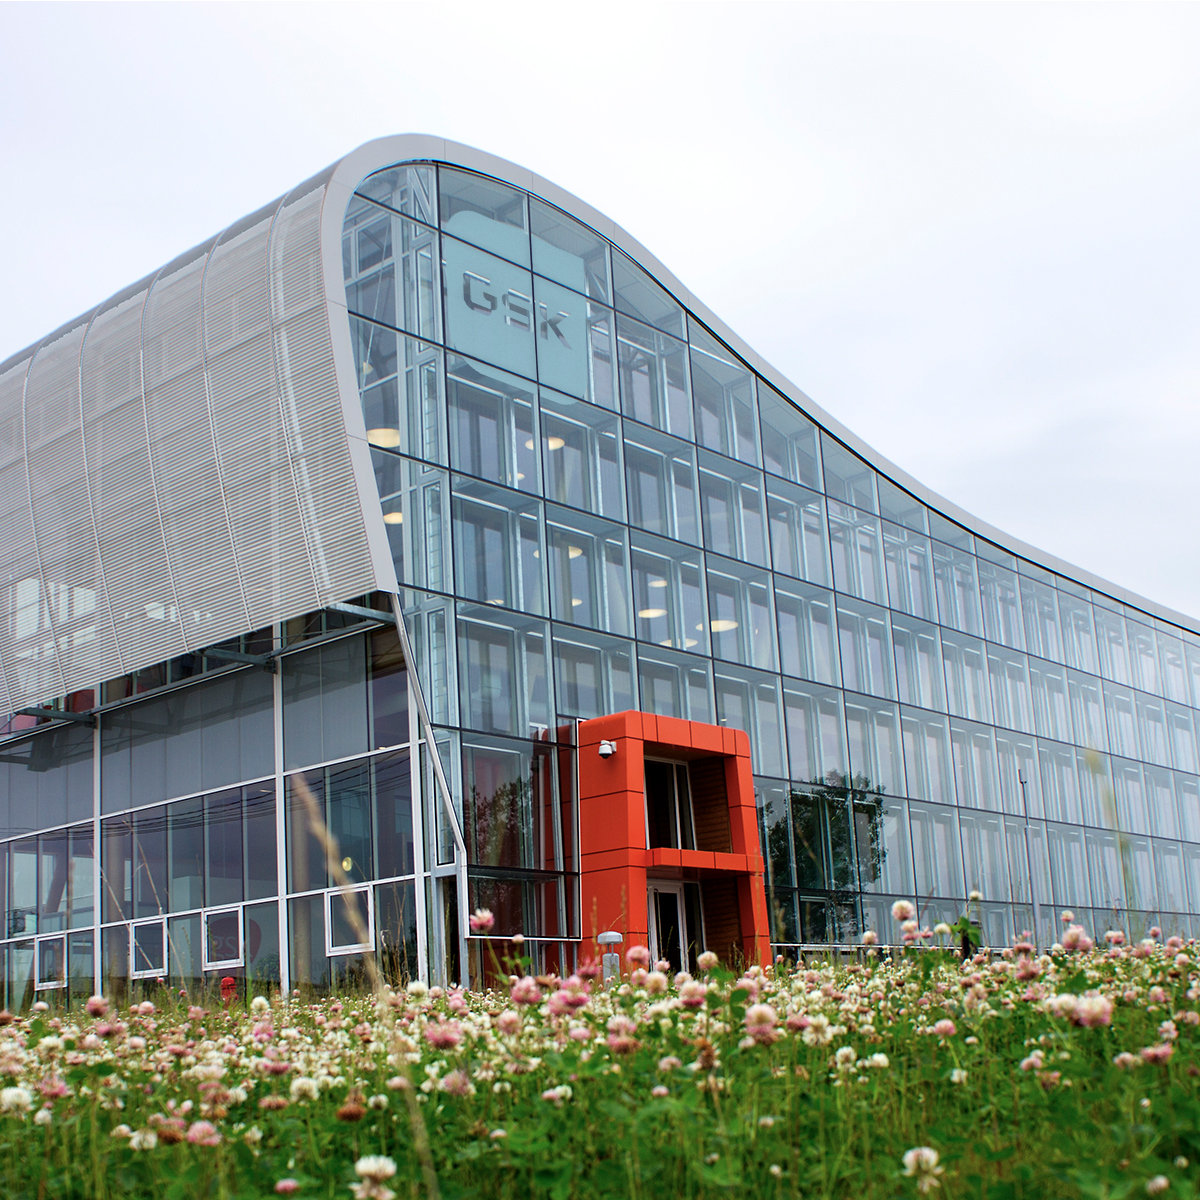 GSK Administrative offices building